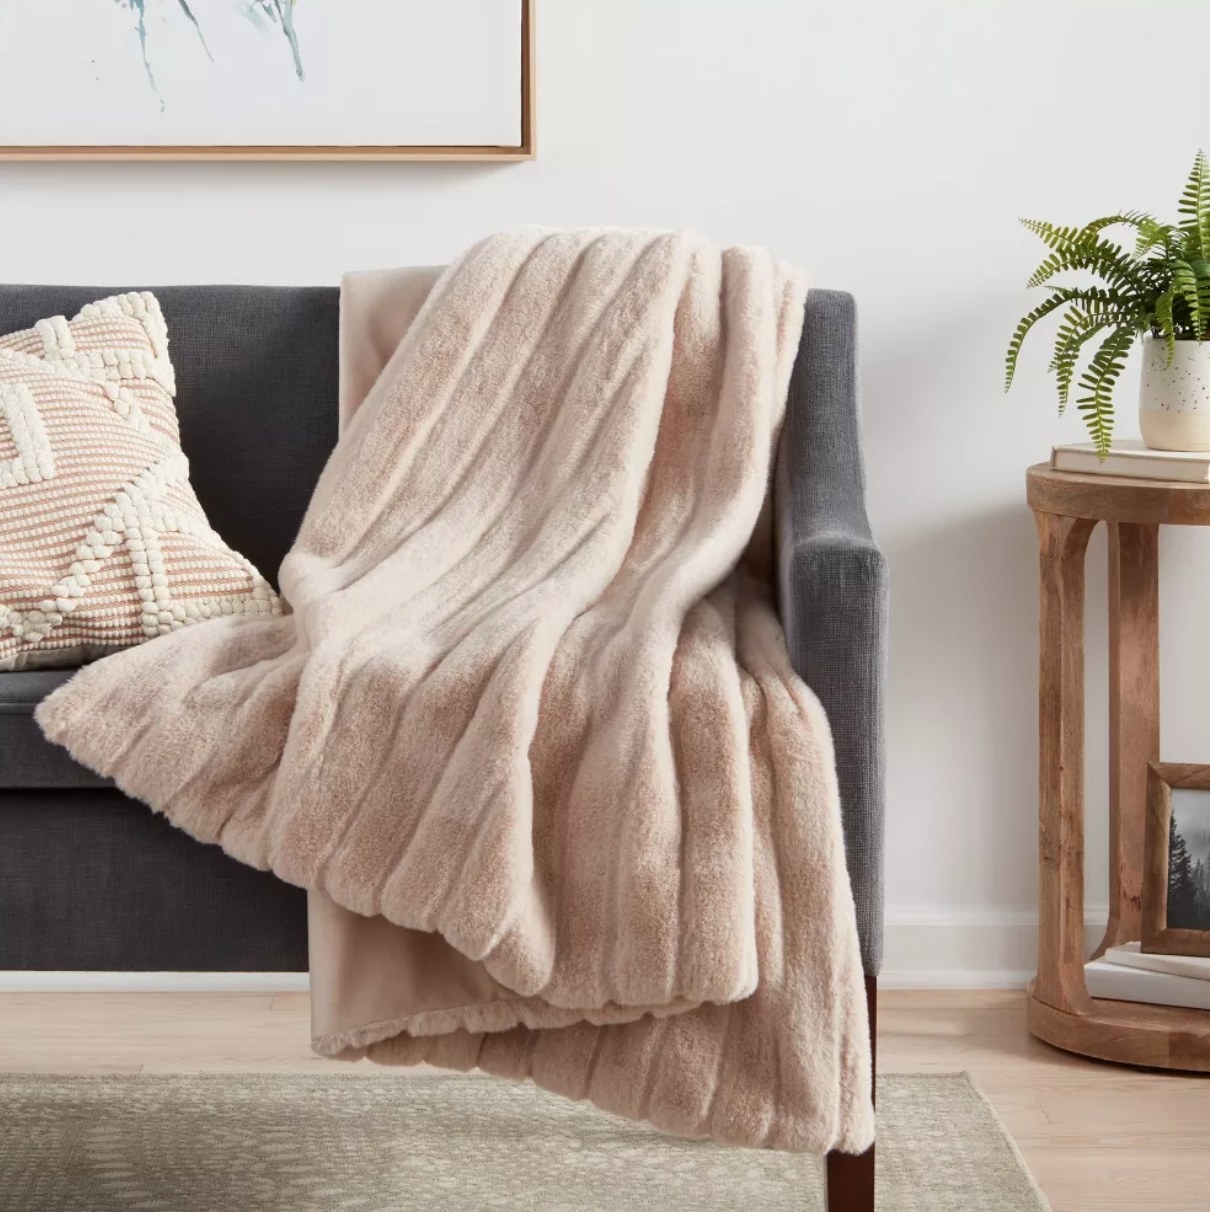 the faux fur blanket in white